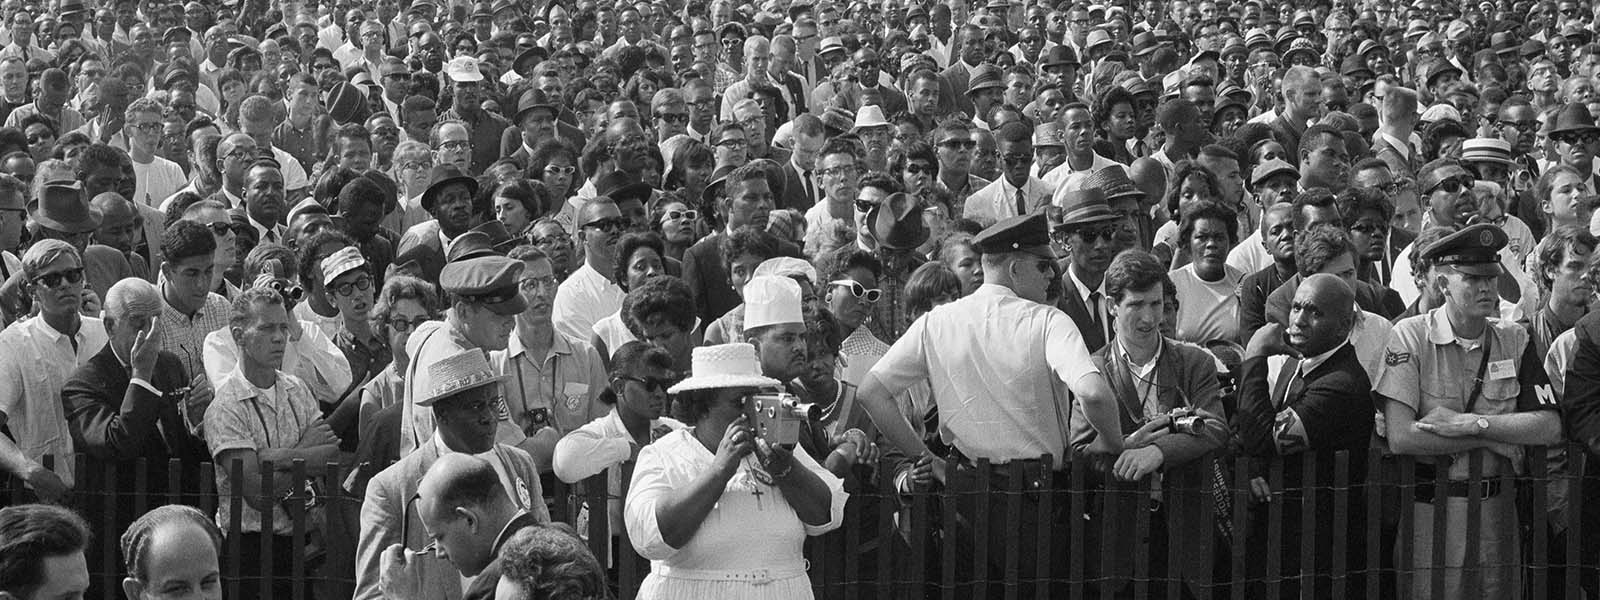 1963 March on Washington for Jobs and Freedom